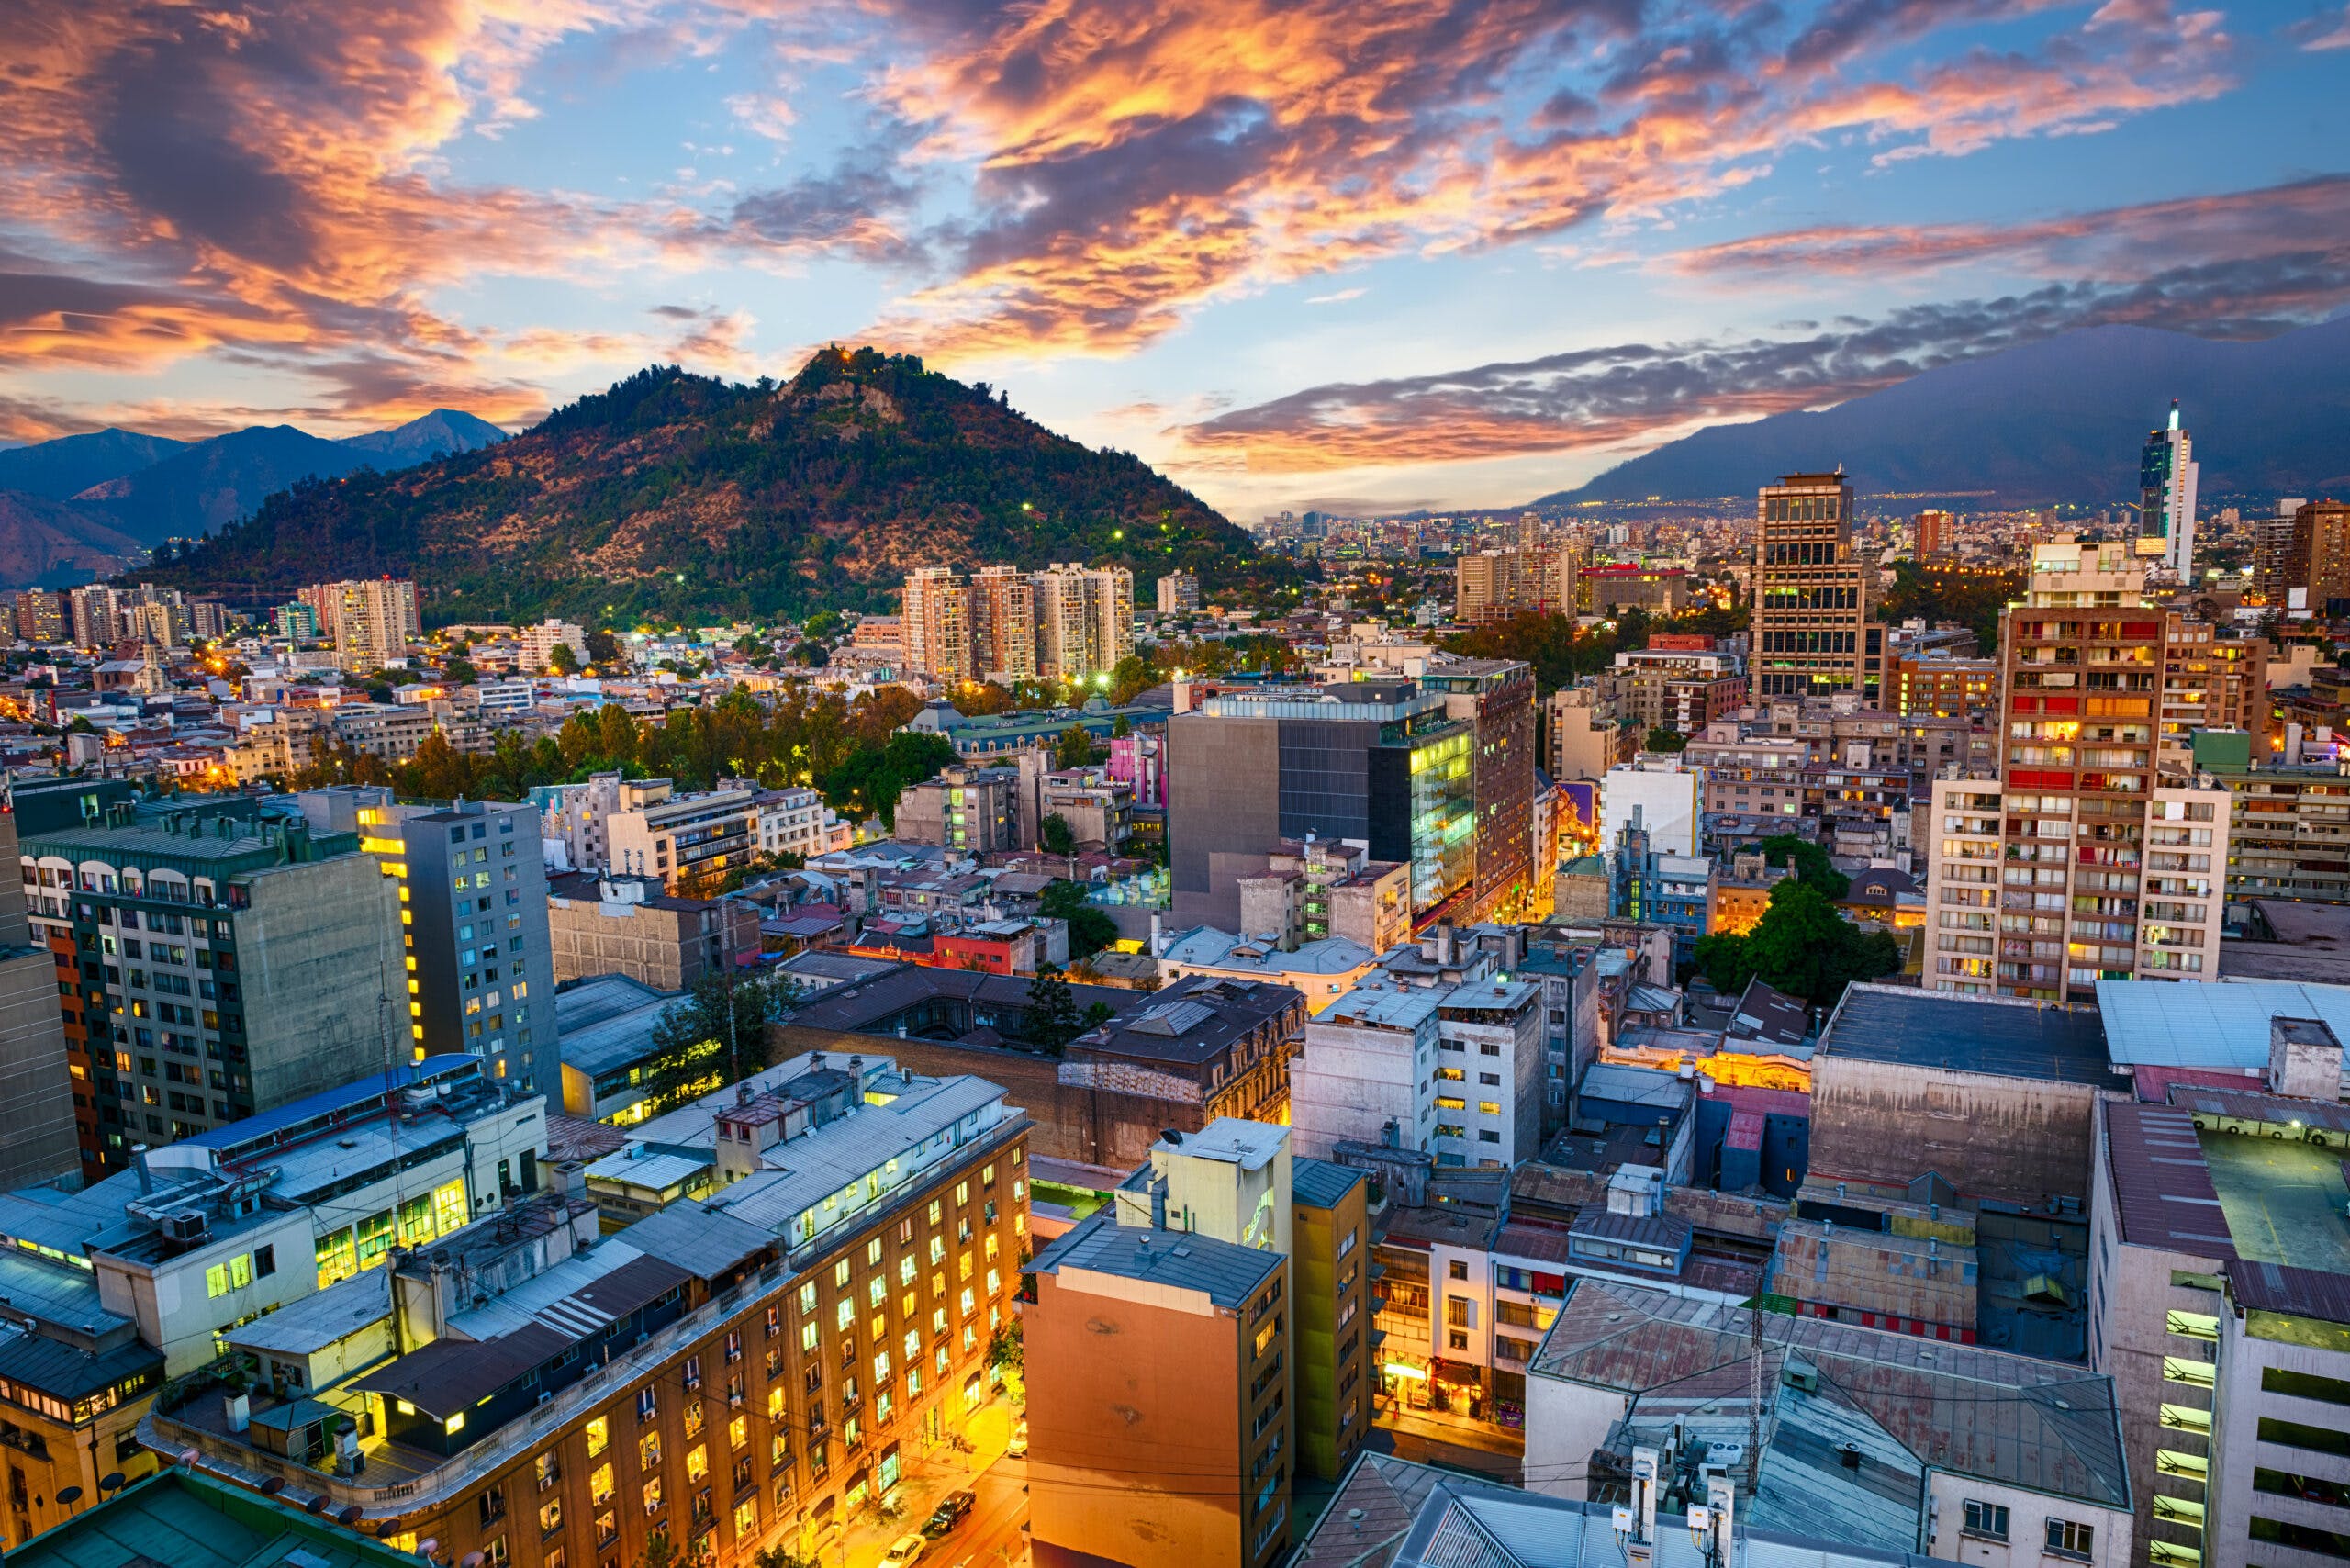 Image of a city in the Latin American investment economy